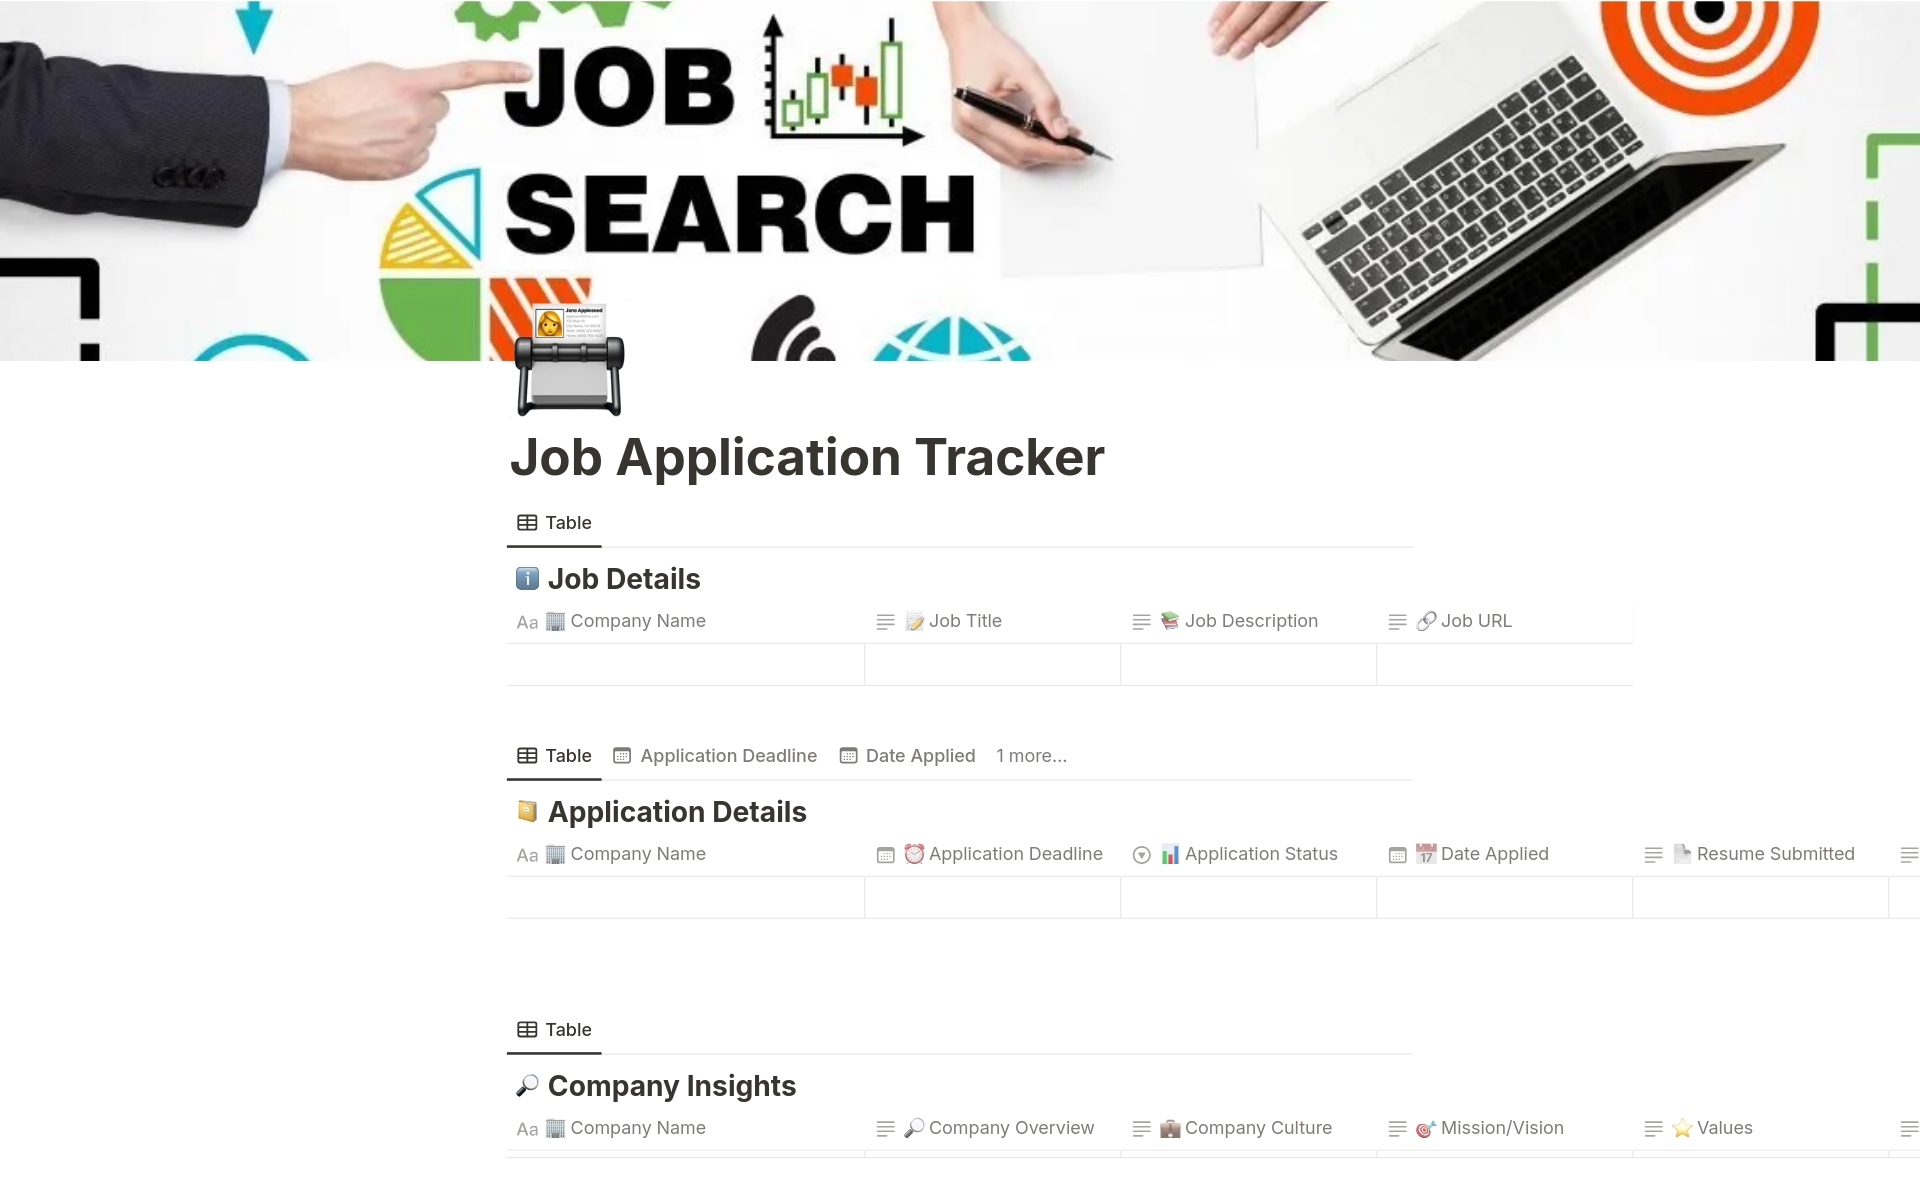 Simplify your job search with this Notion template, tracking every aspect of job applications to streamline your career journey.